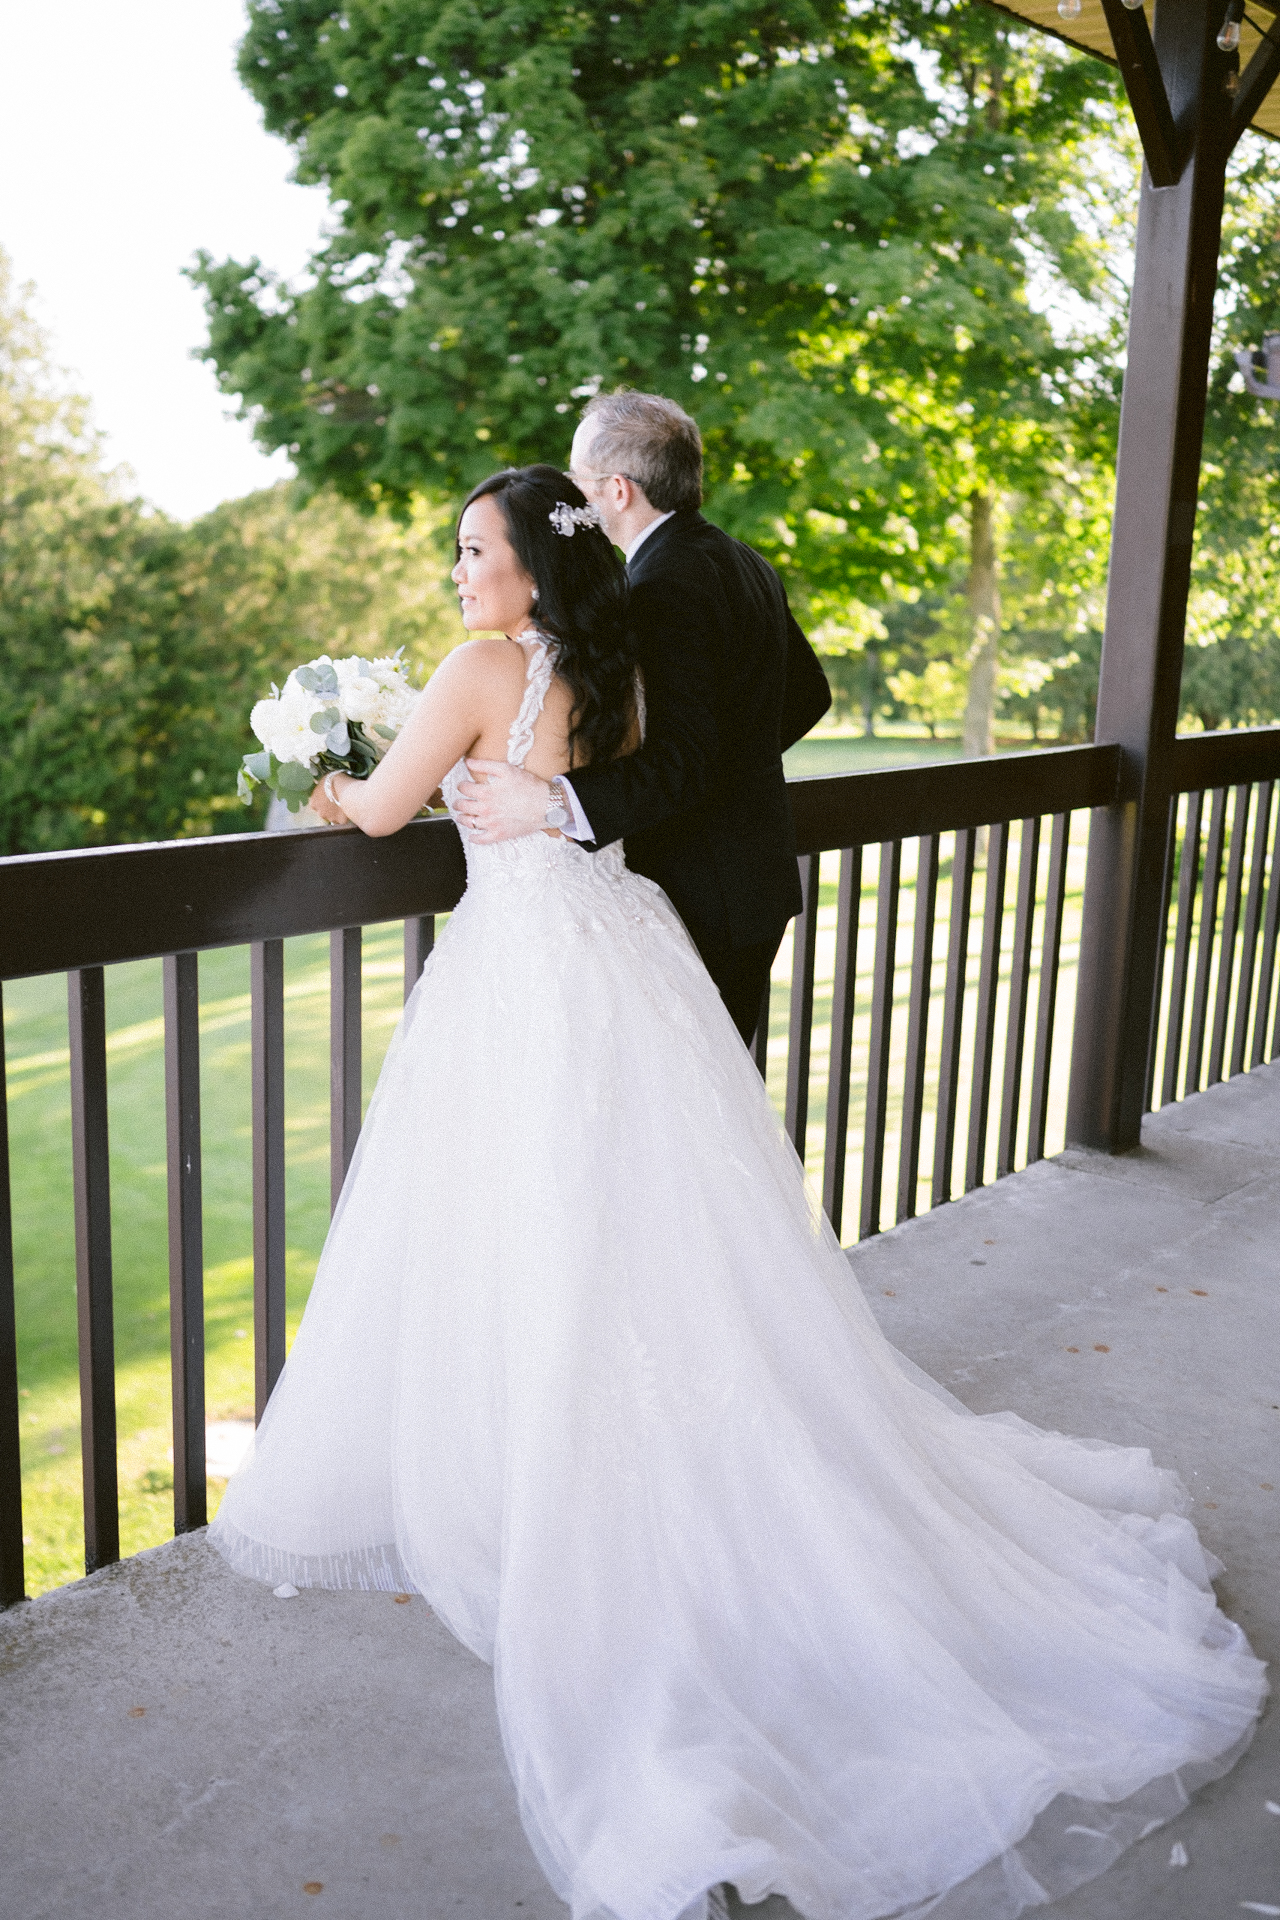 A bride and groom standing together on a balcony, surrounded by greenery.